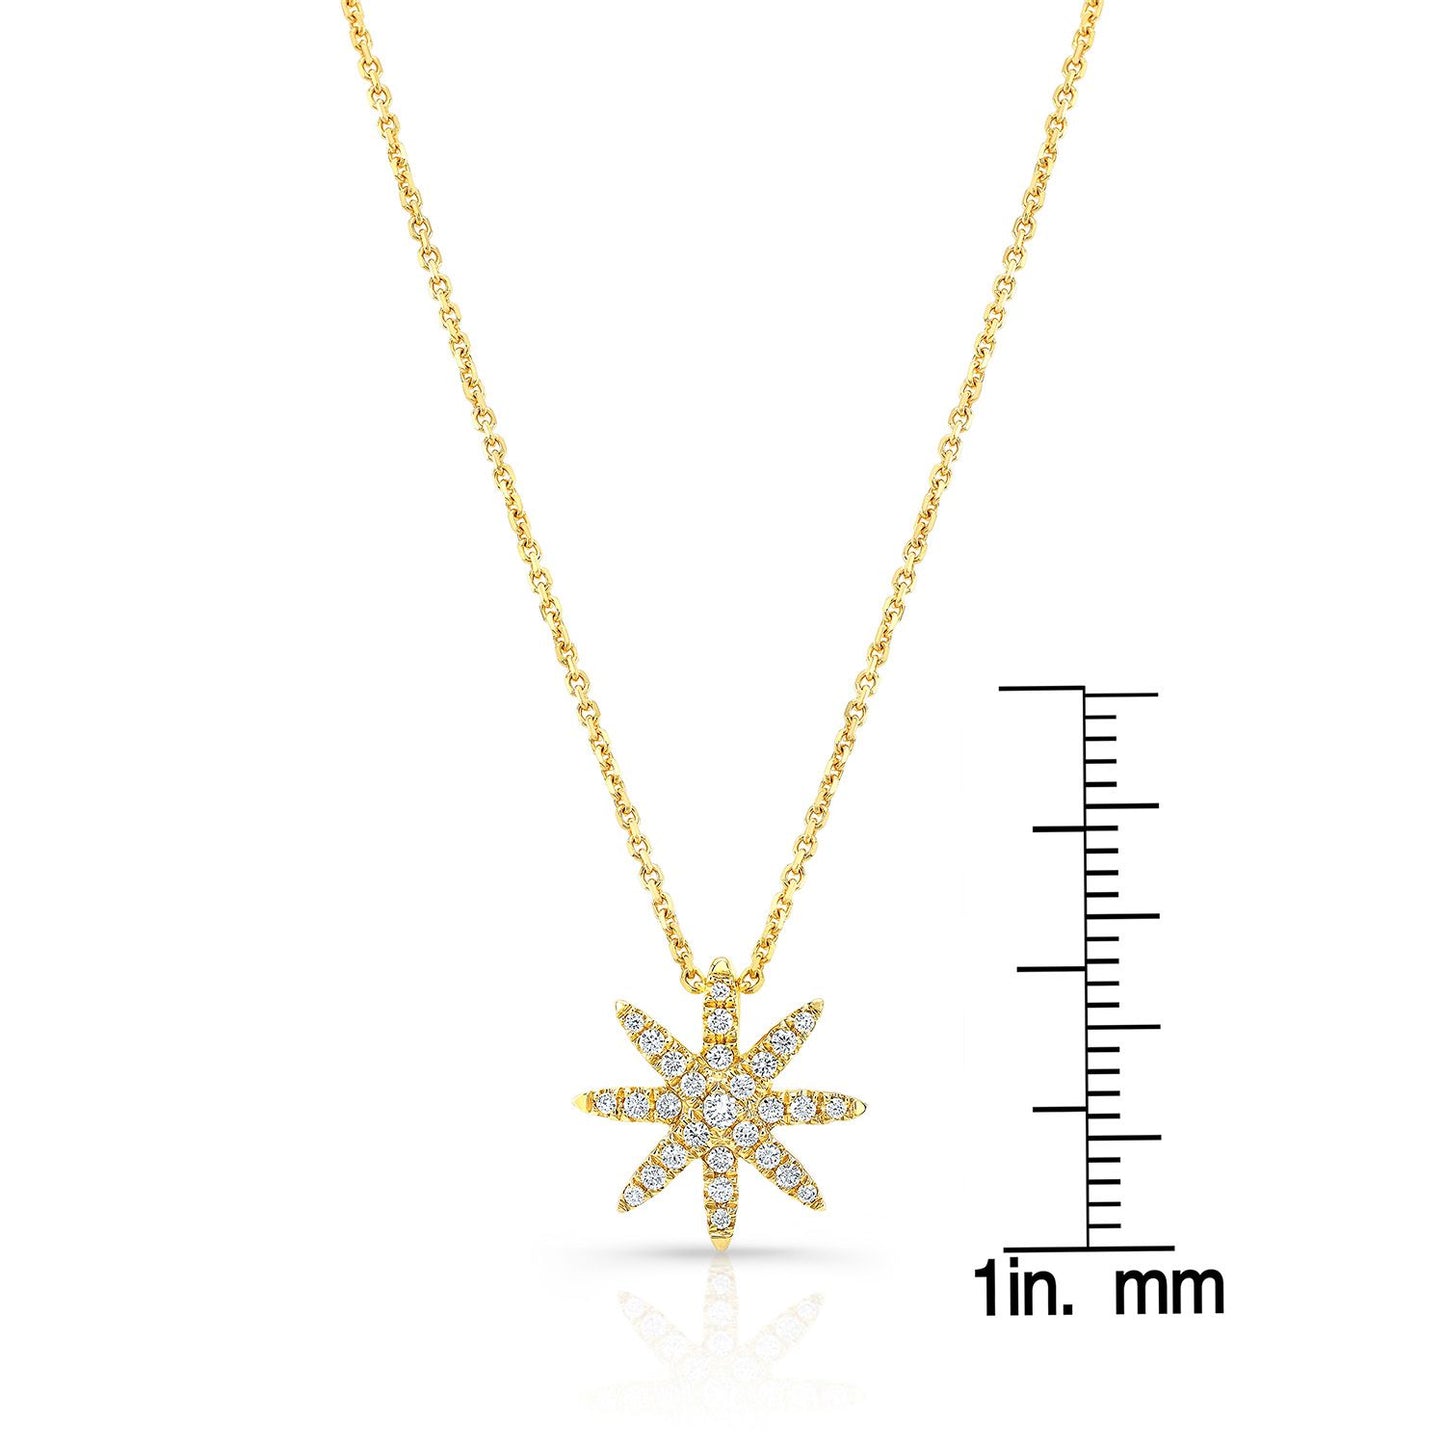 Diamond Pave 8-point Star Pendant In 14k Yellow Gold